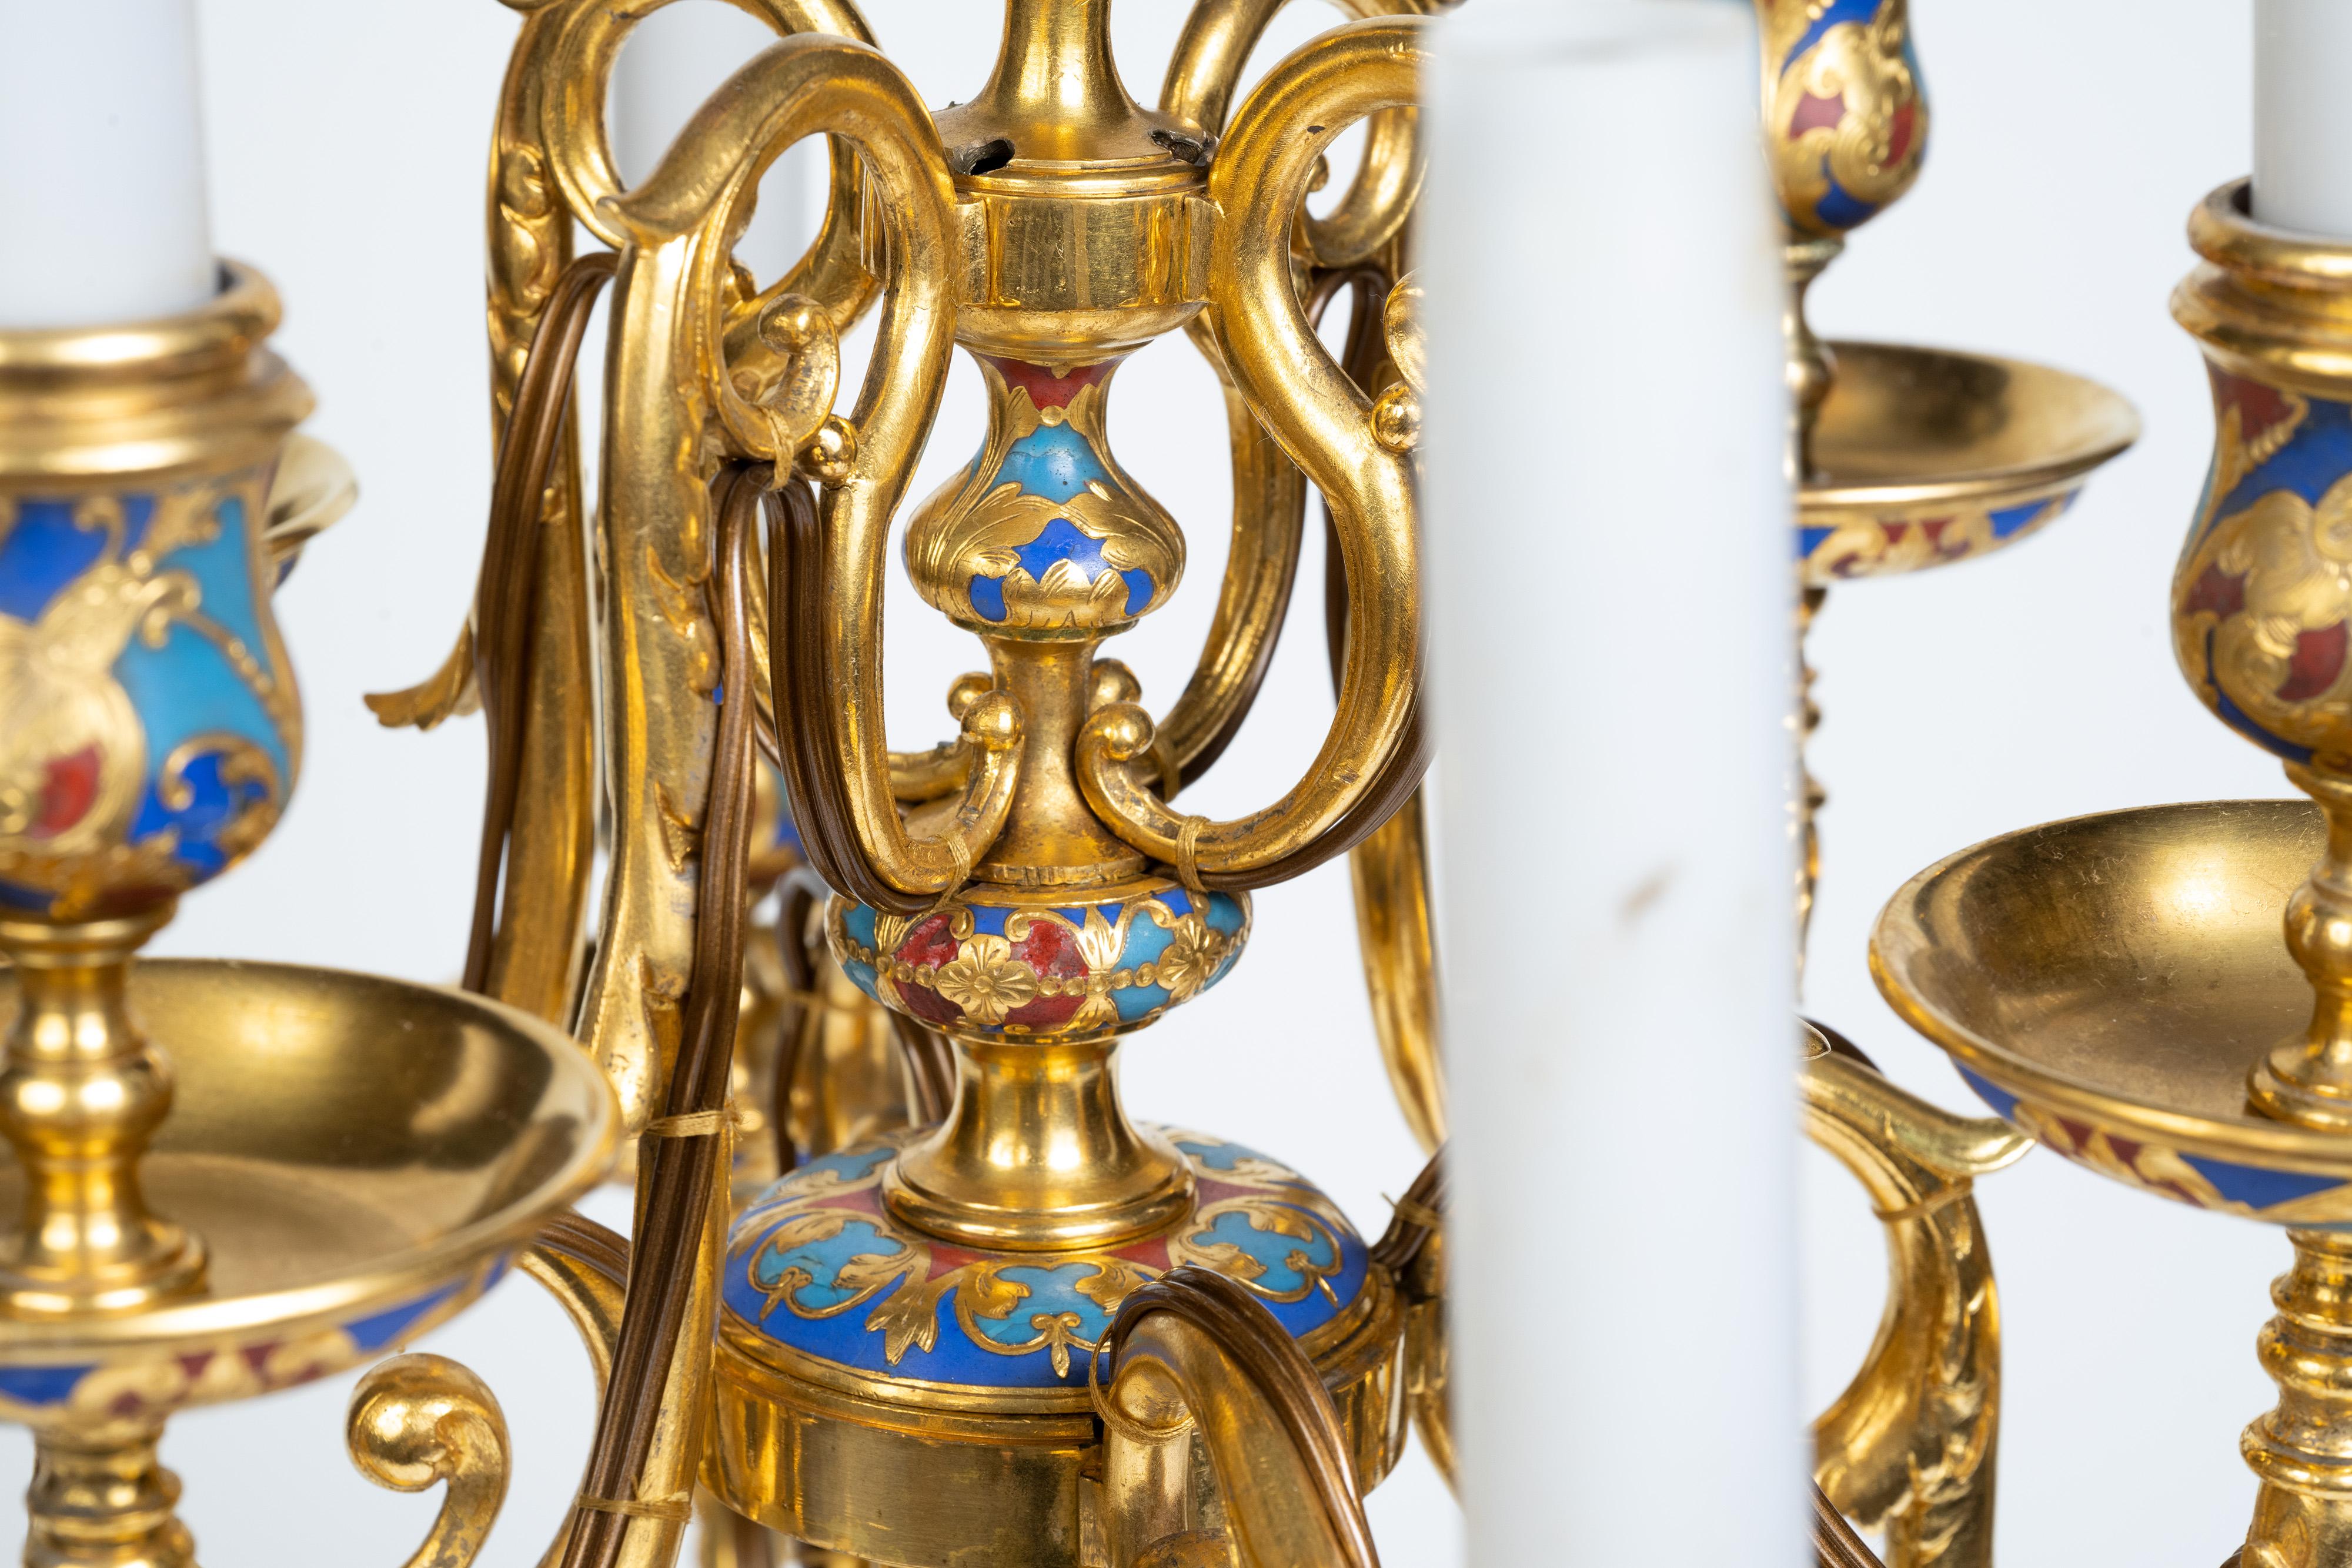 An Exceptional Pair of Champleve Enamel Ormolu Candelabra by Sevin & Barbedienne For Sale 5